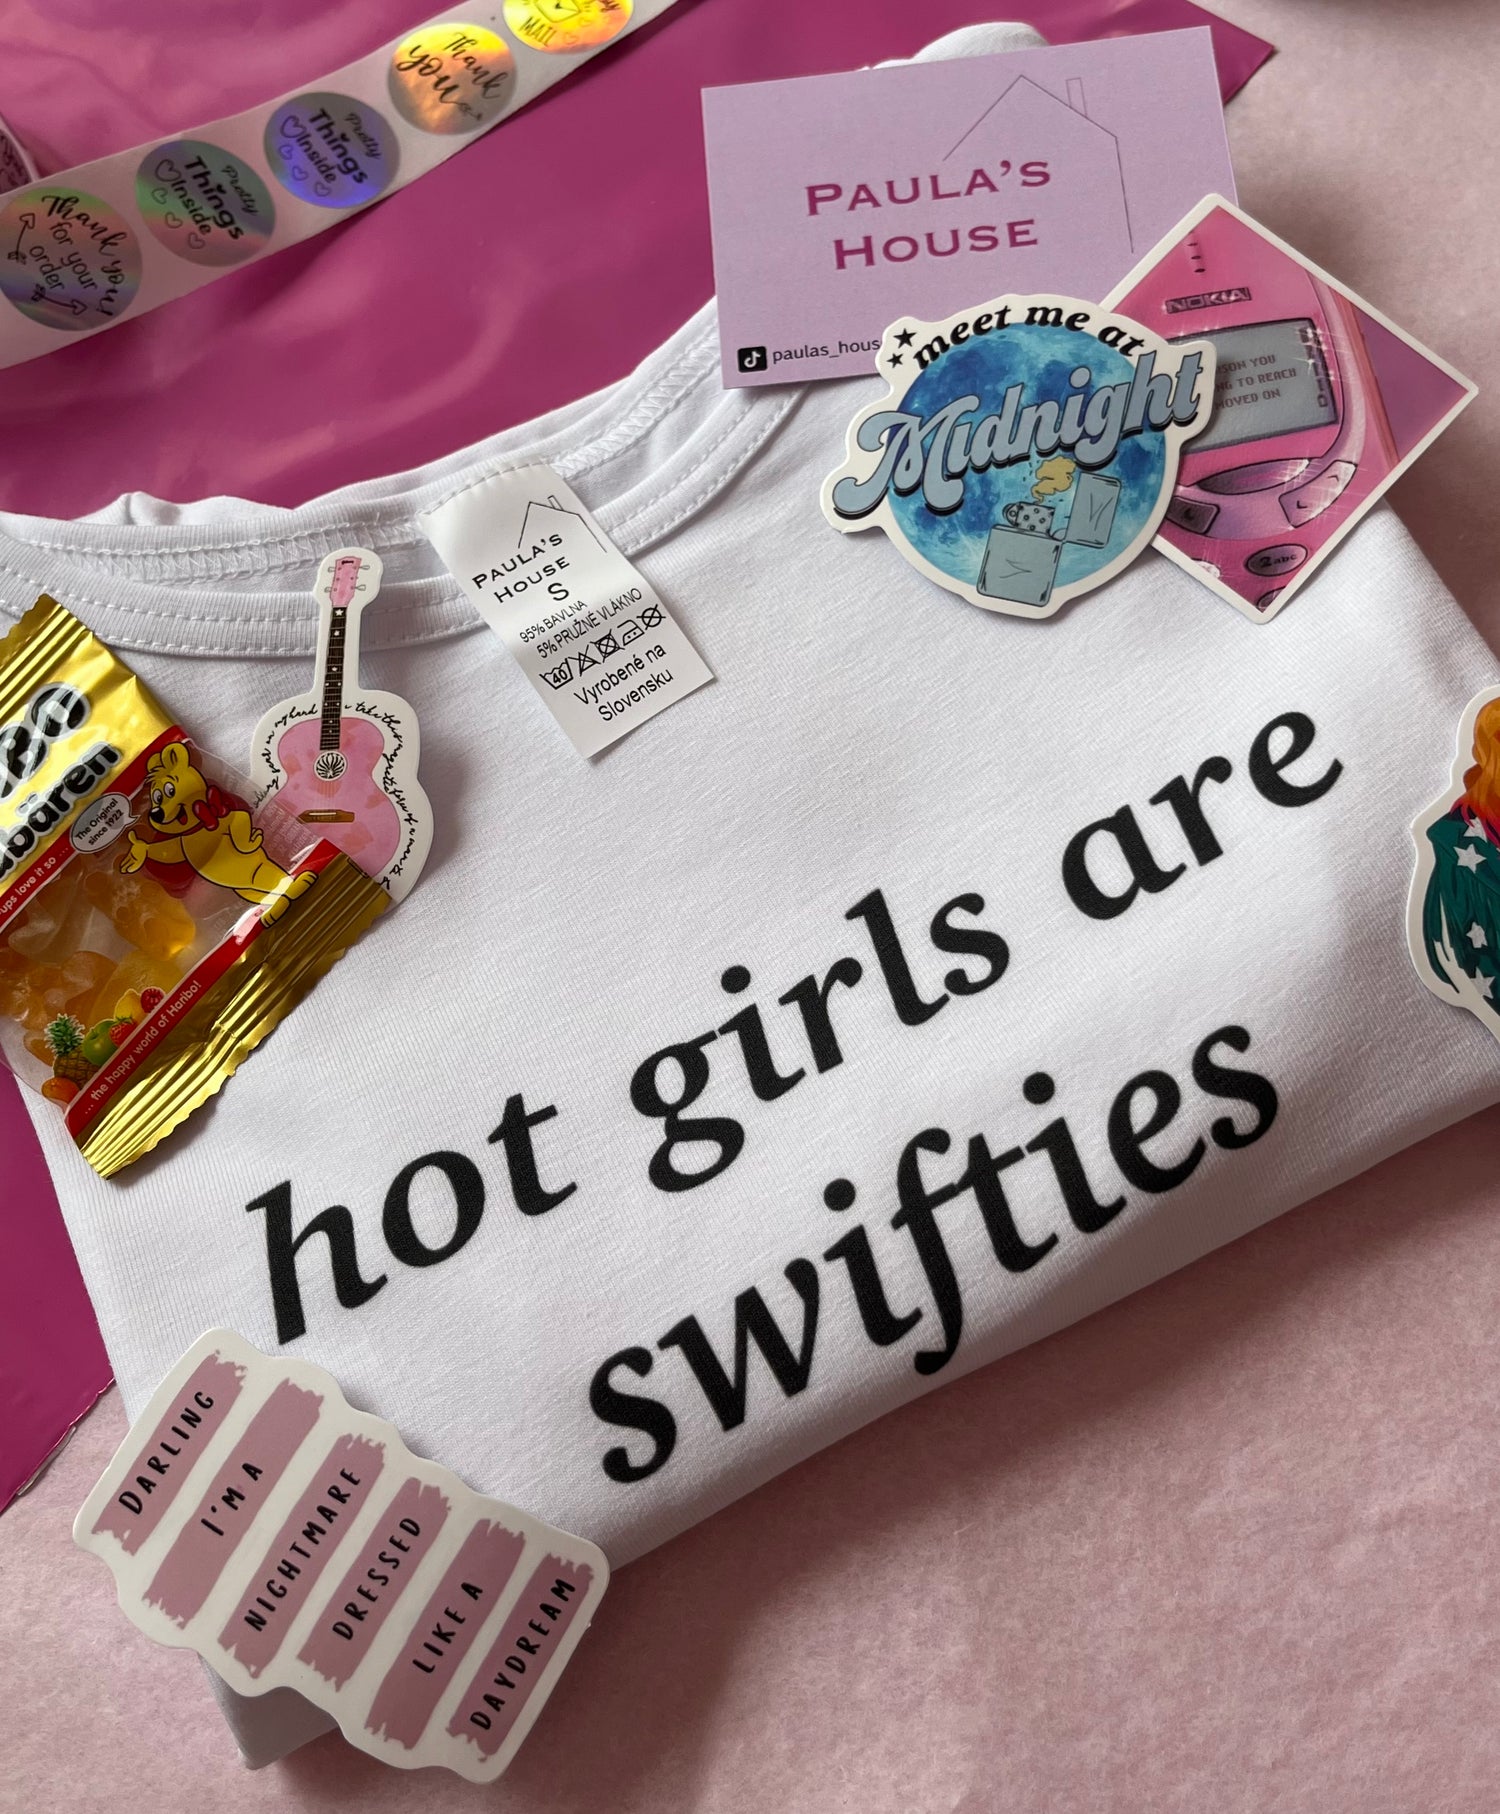 Just for swifties